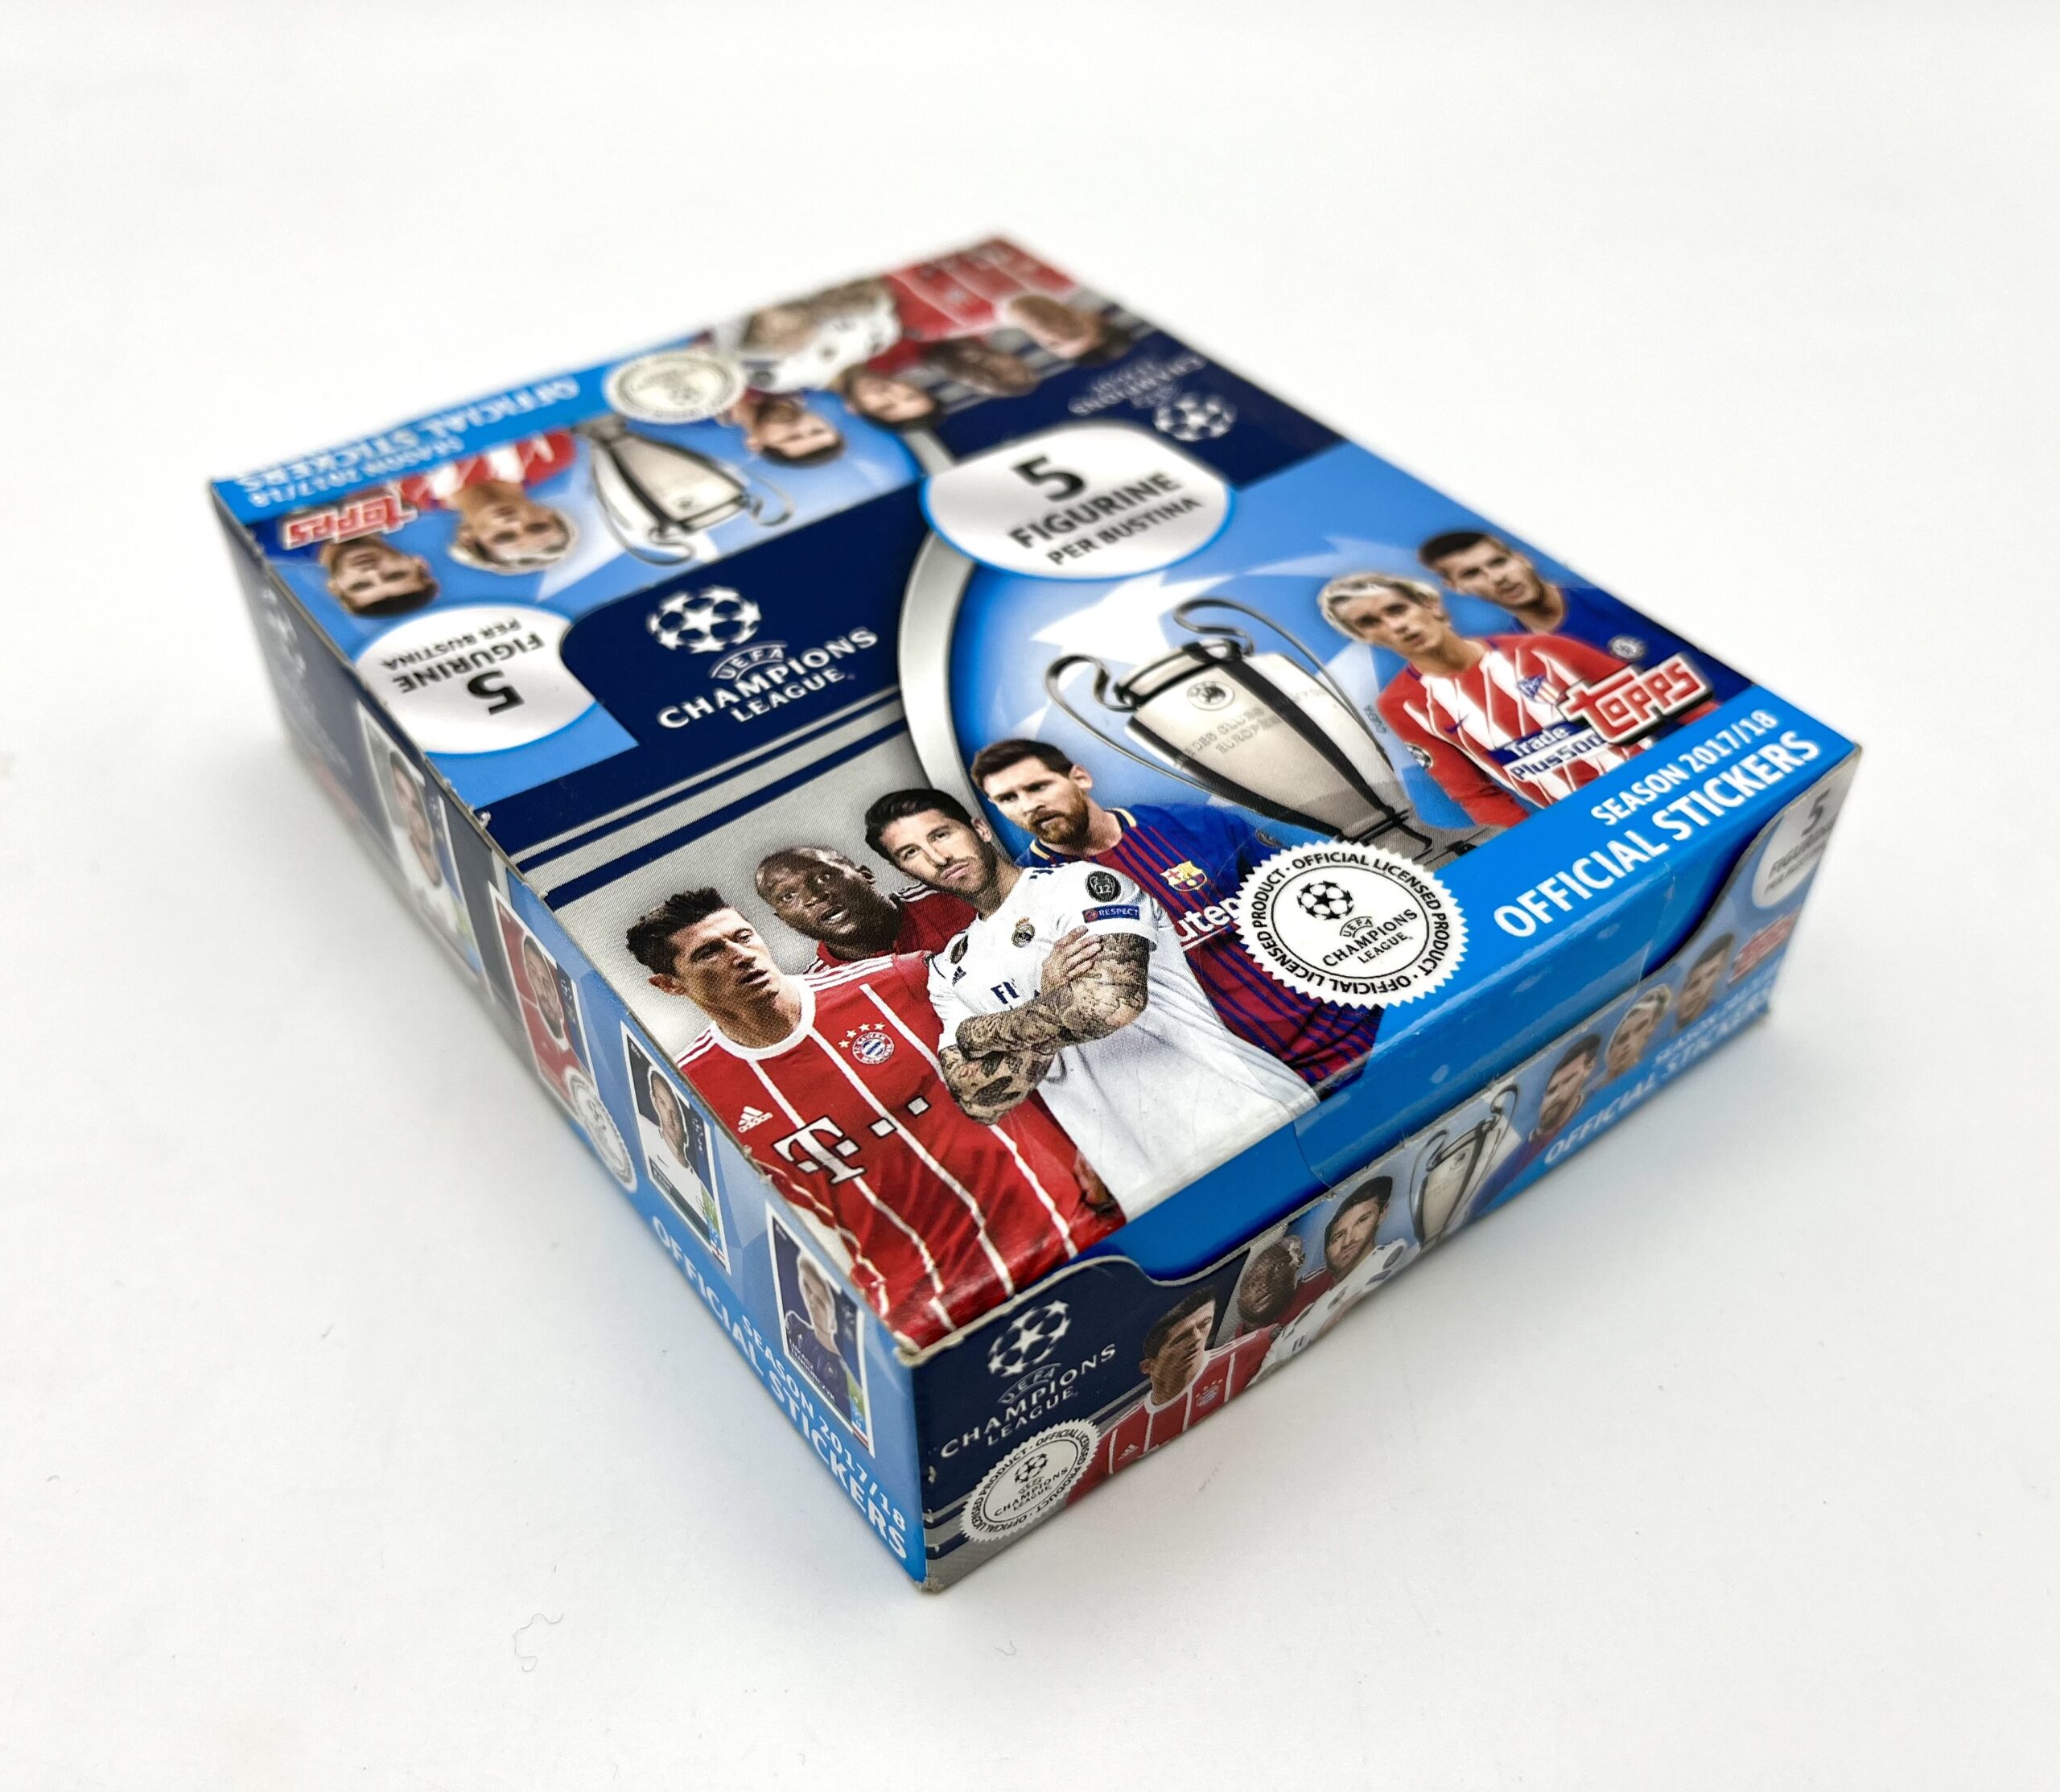 Champions League Topps 2017 2018 Box 30 bustine figurine Mbappe Rookie #248